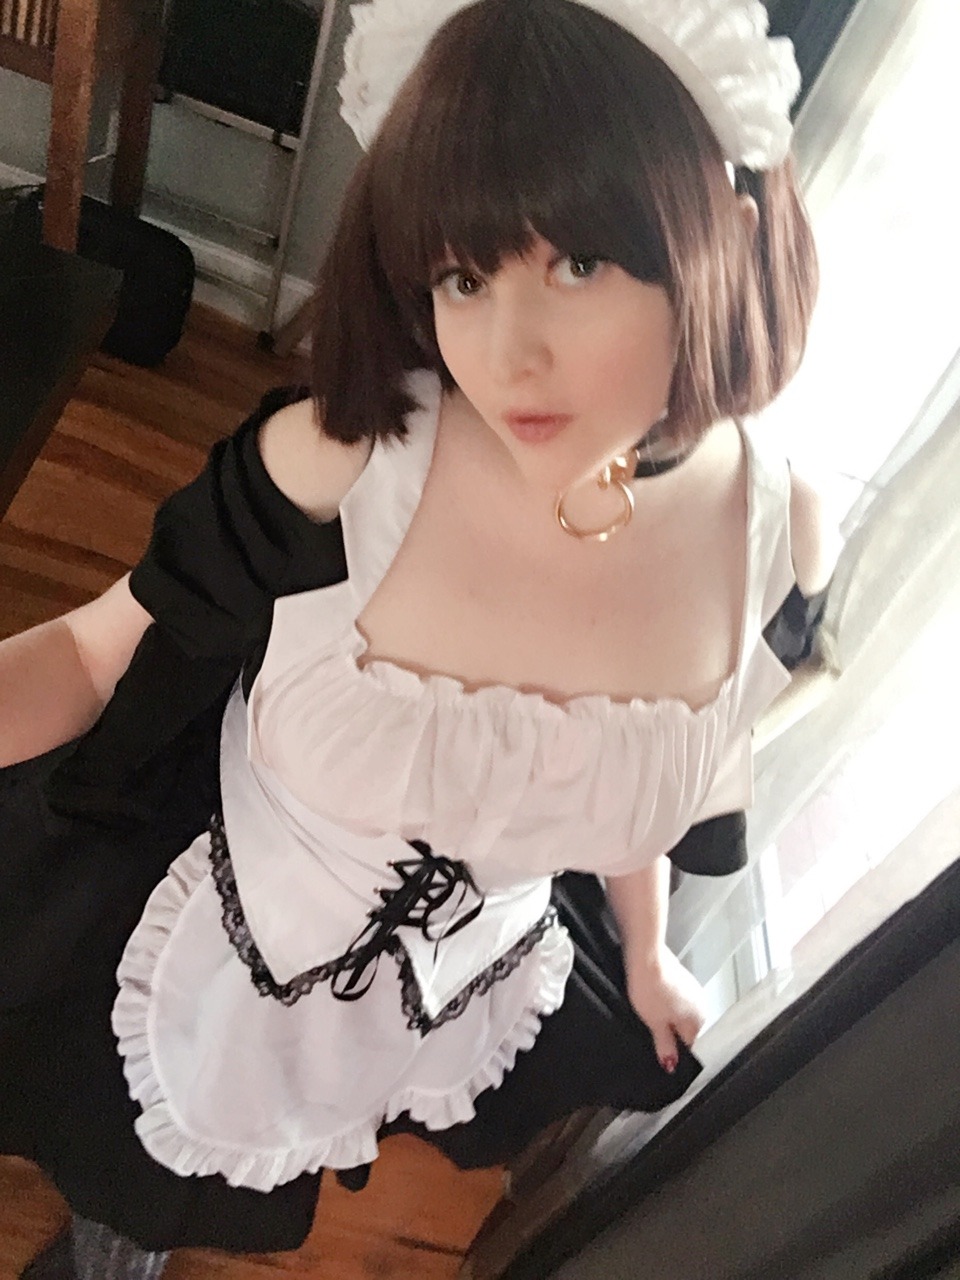 nsfwfoxydenofficial: Love maids? Well you’re in luck! Next months Patreon exclusive